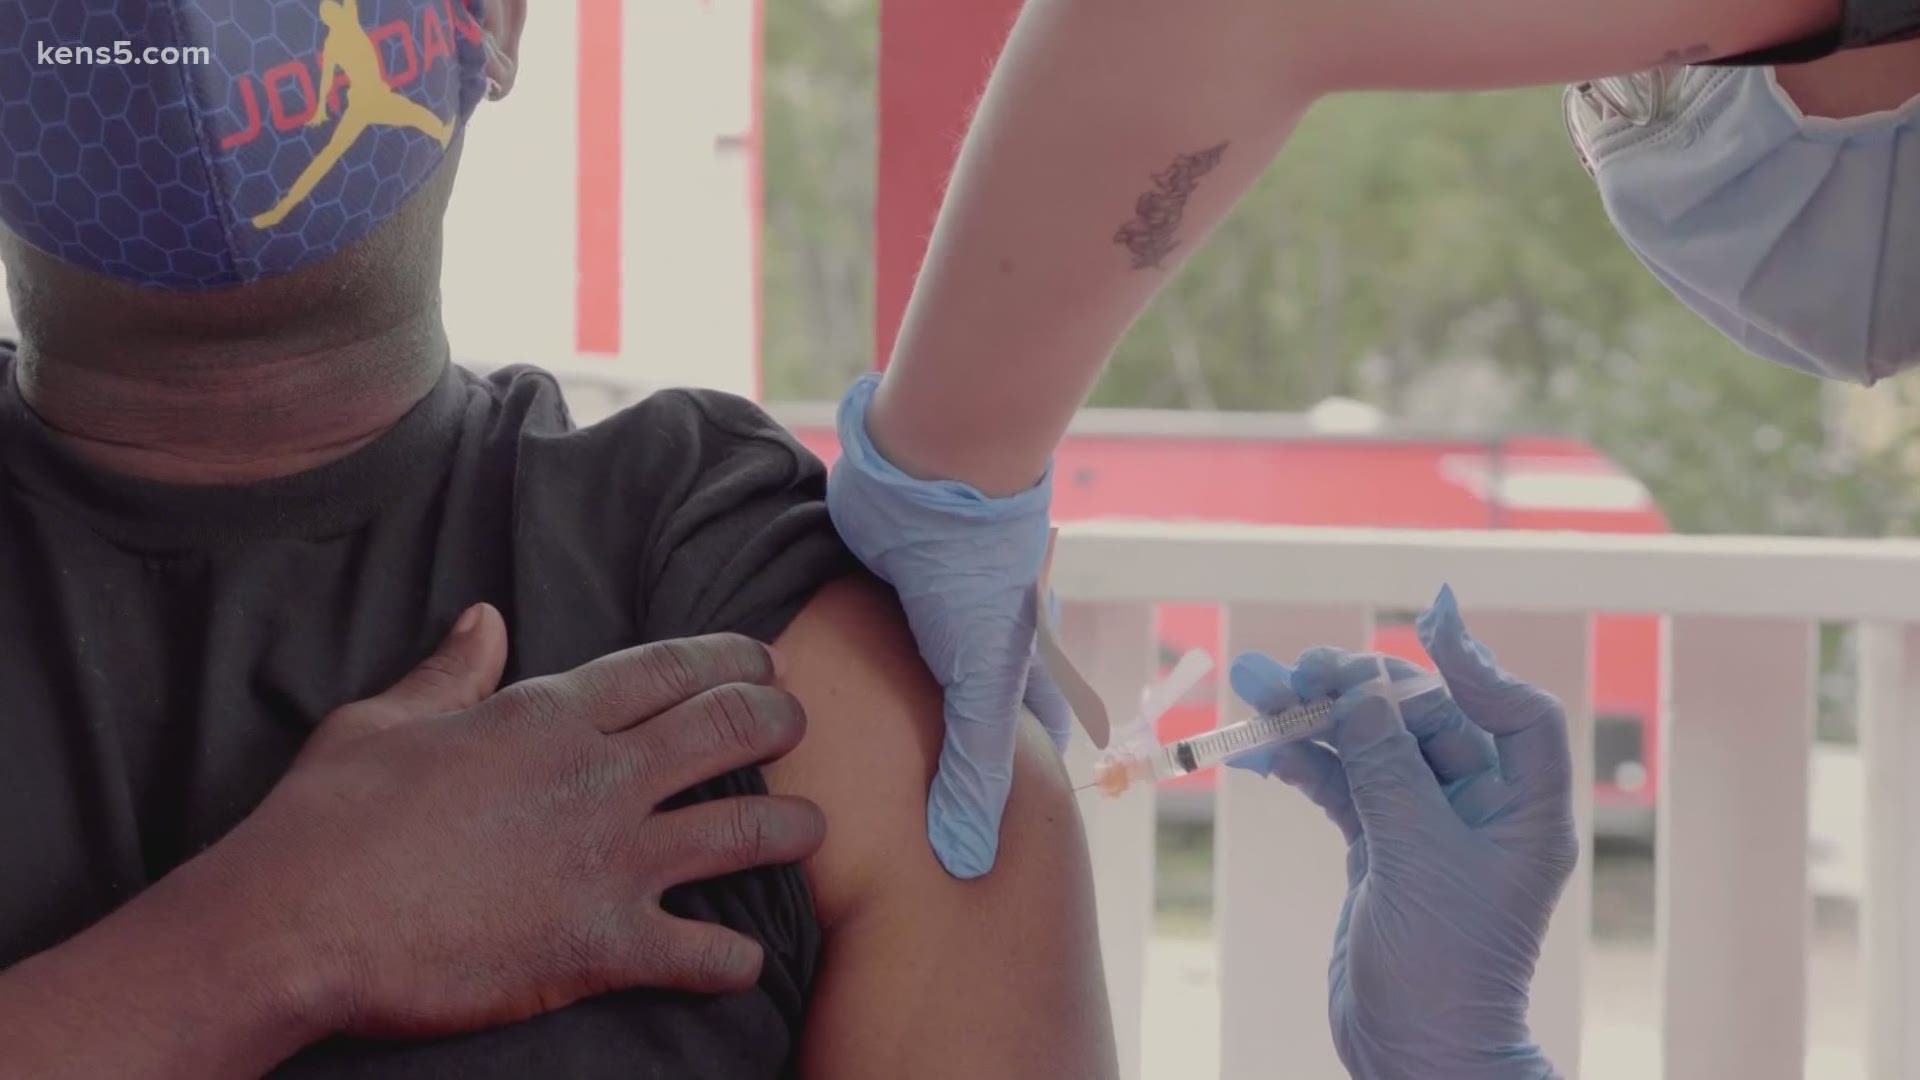 With fewer people getting immunized at organized mass vaccination sites, the state is widening access to mobile clinics manned by health officials.